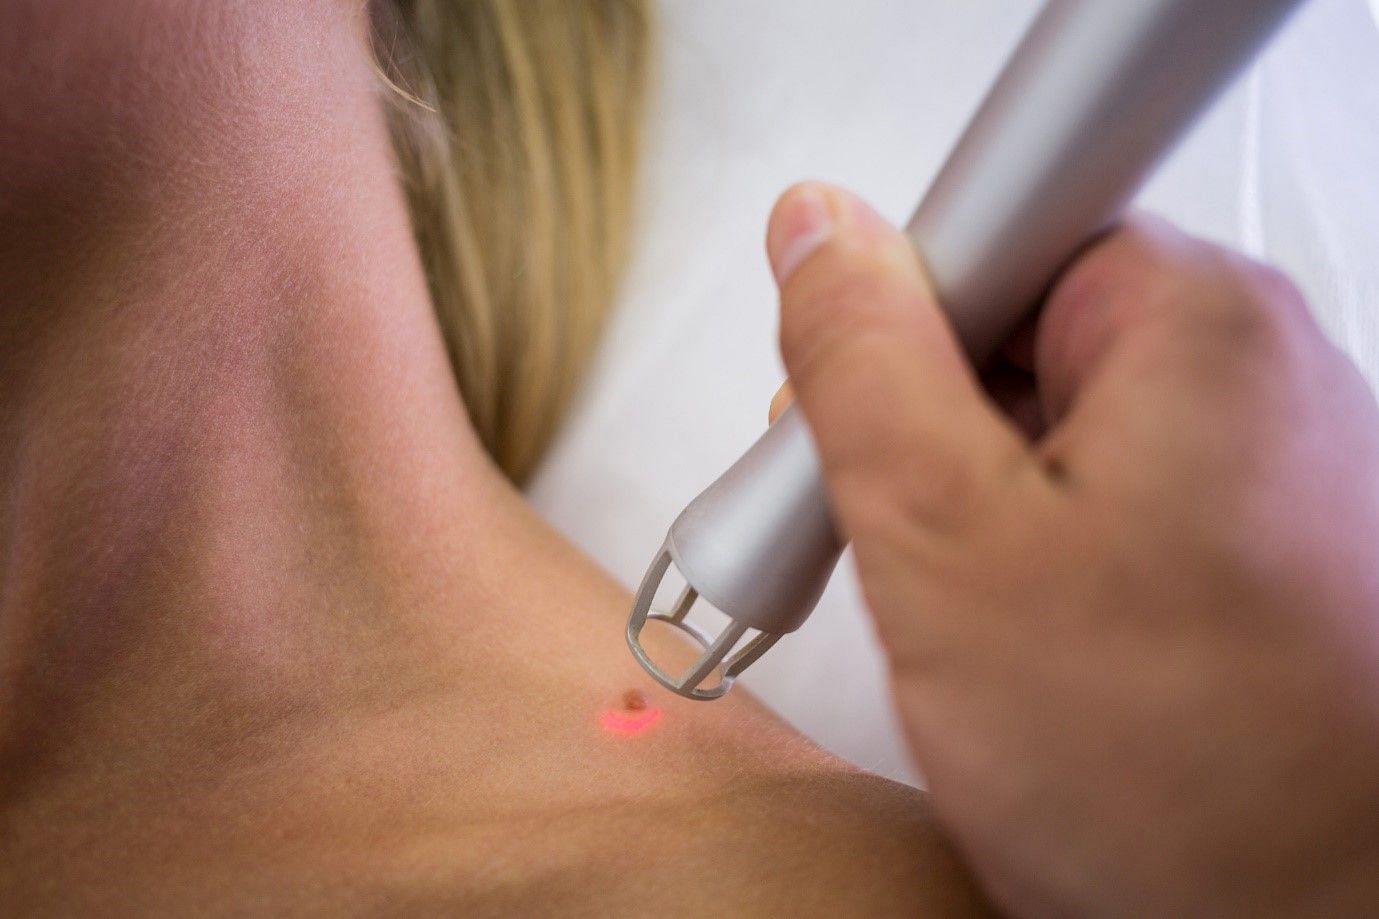 People usually get Skin Tags and Moles removed due to cosmetic reasons (Image by Wavebreakmedia_micro on Freepik)